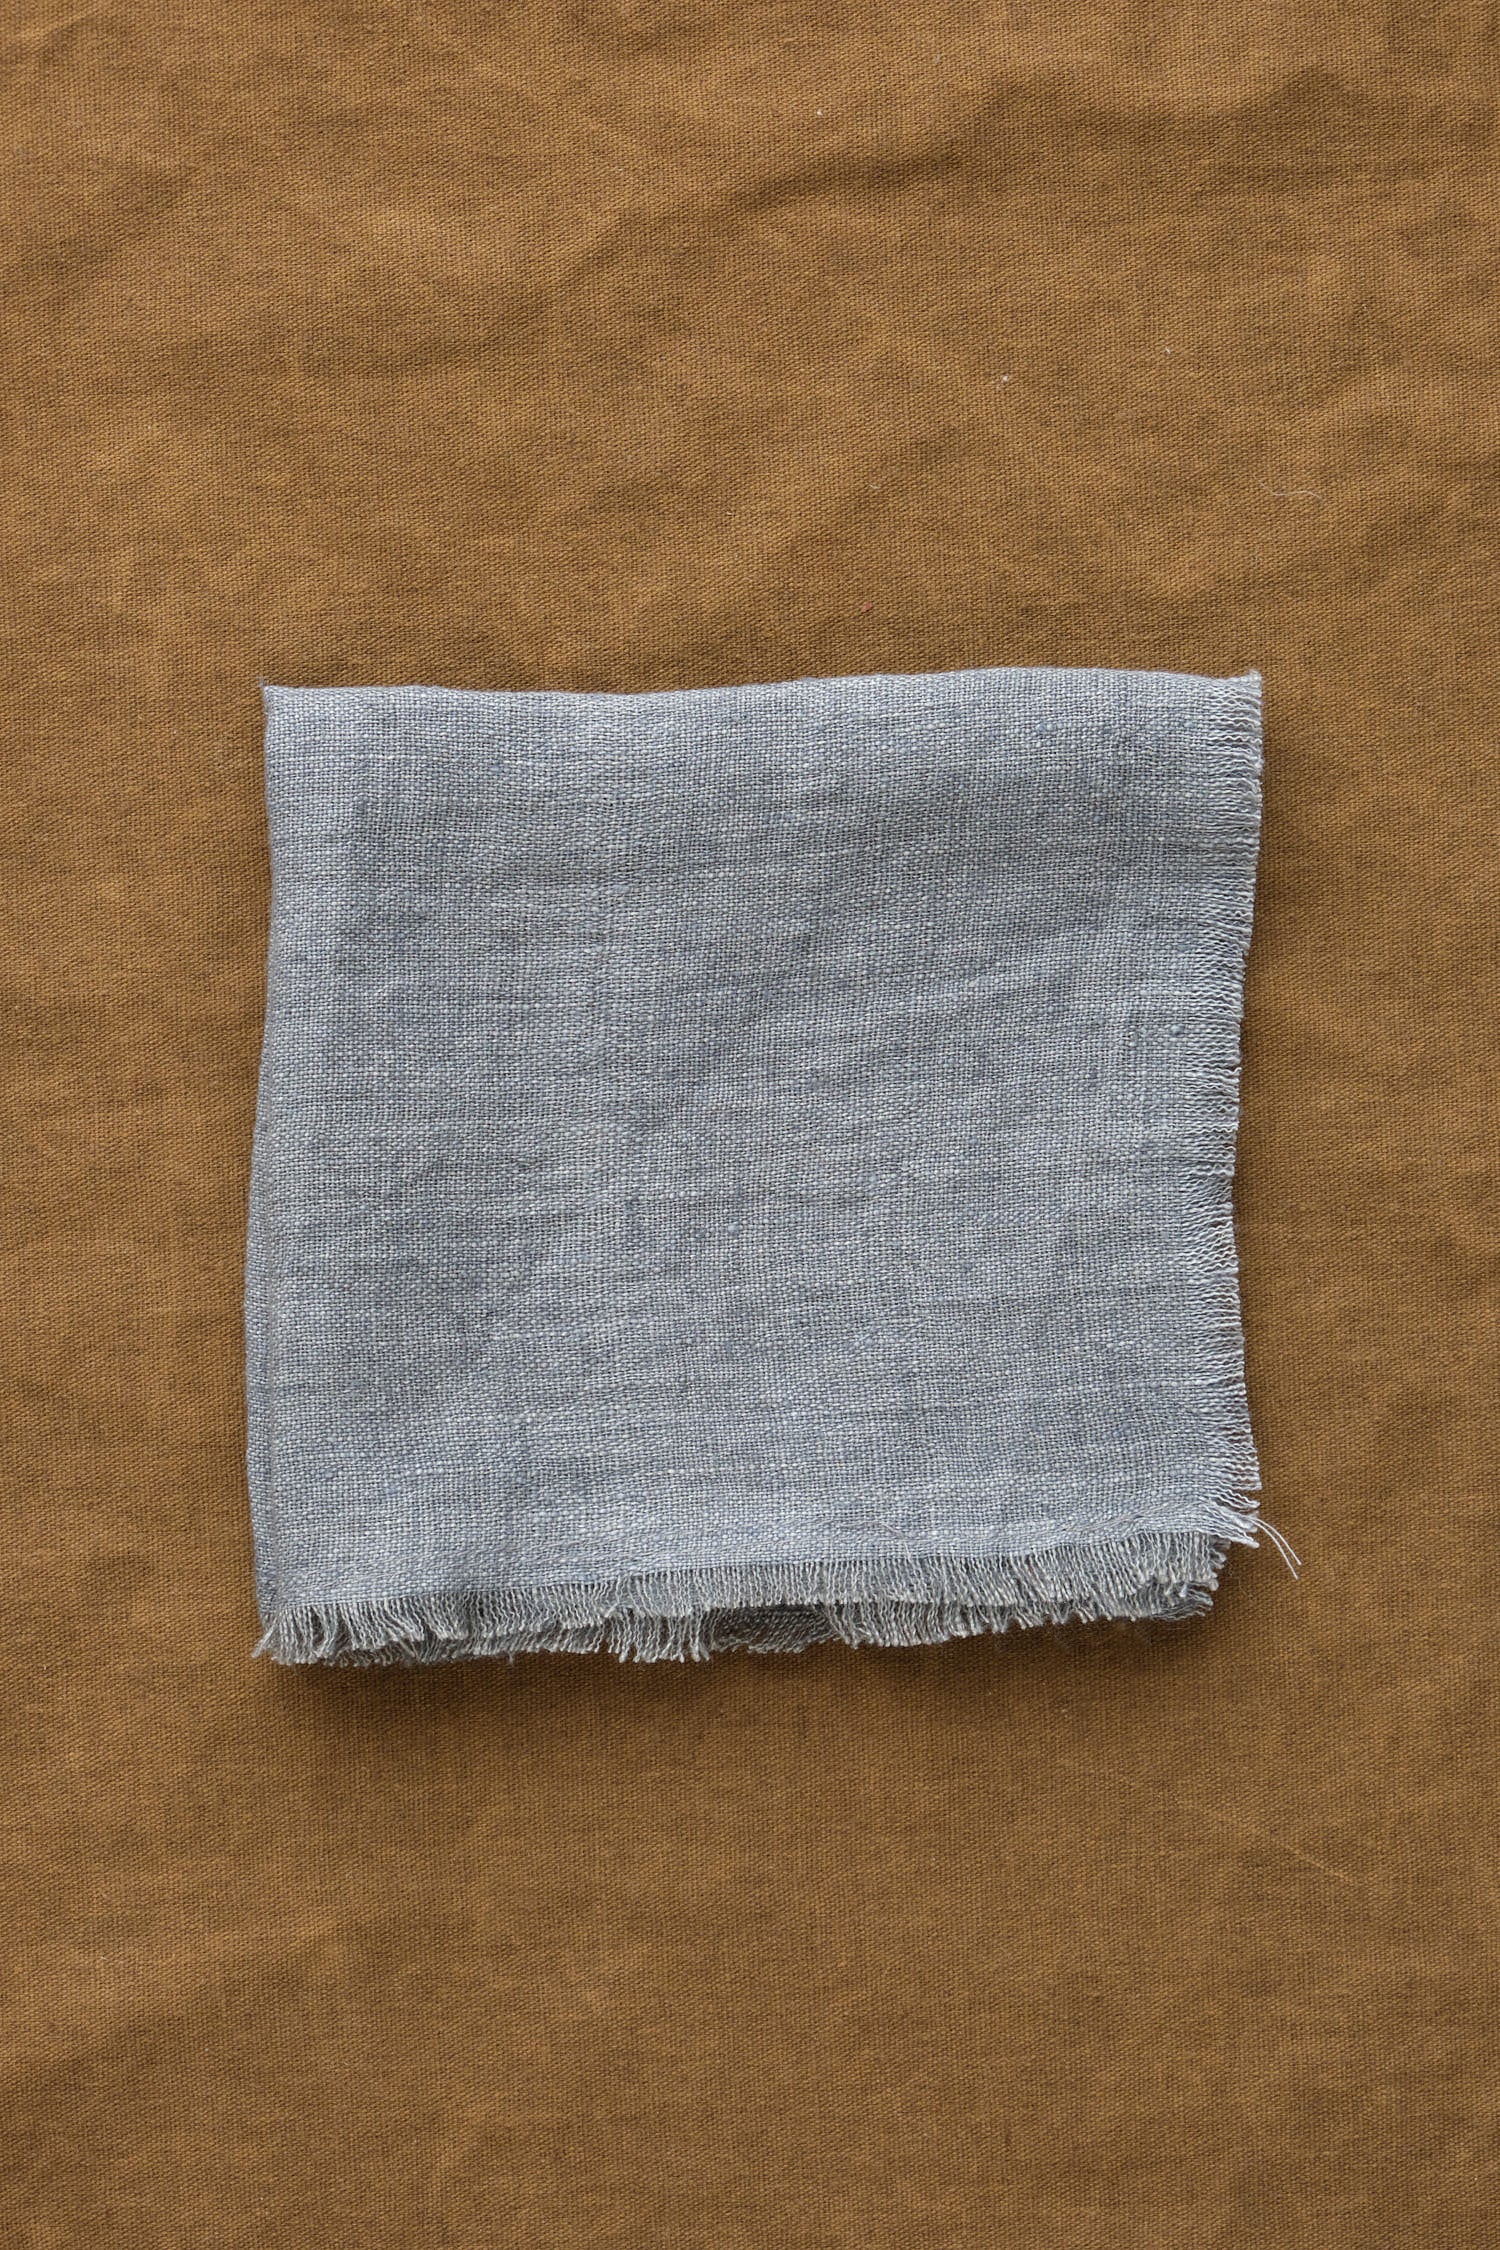 Stone Washed Linen Cocktail Napkin in Oyster